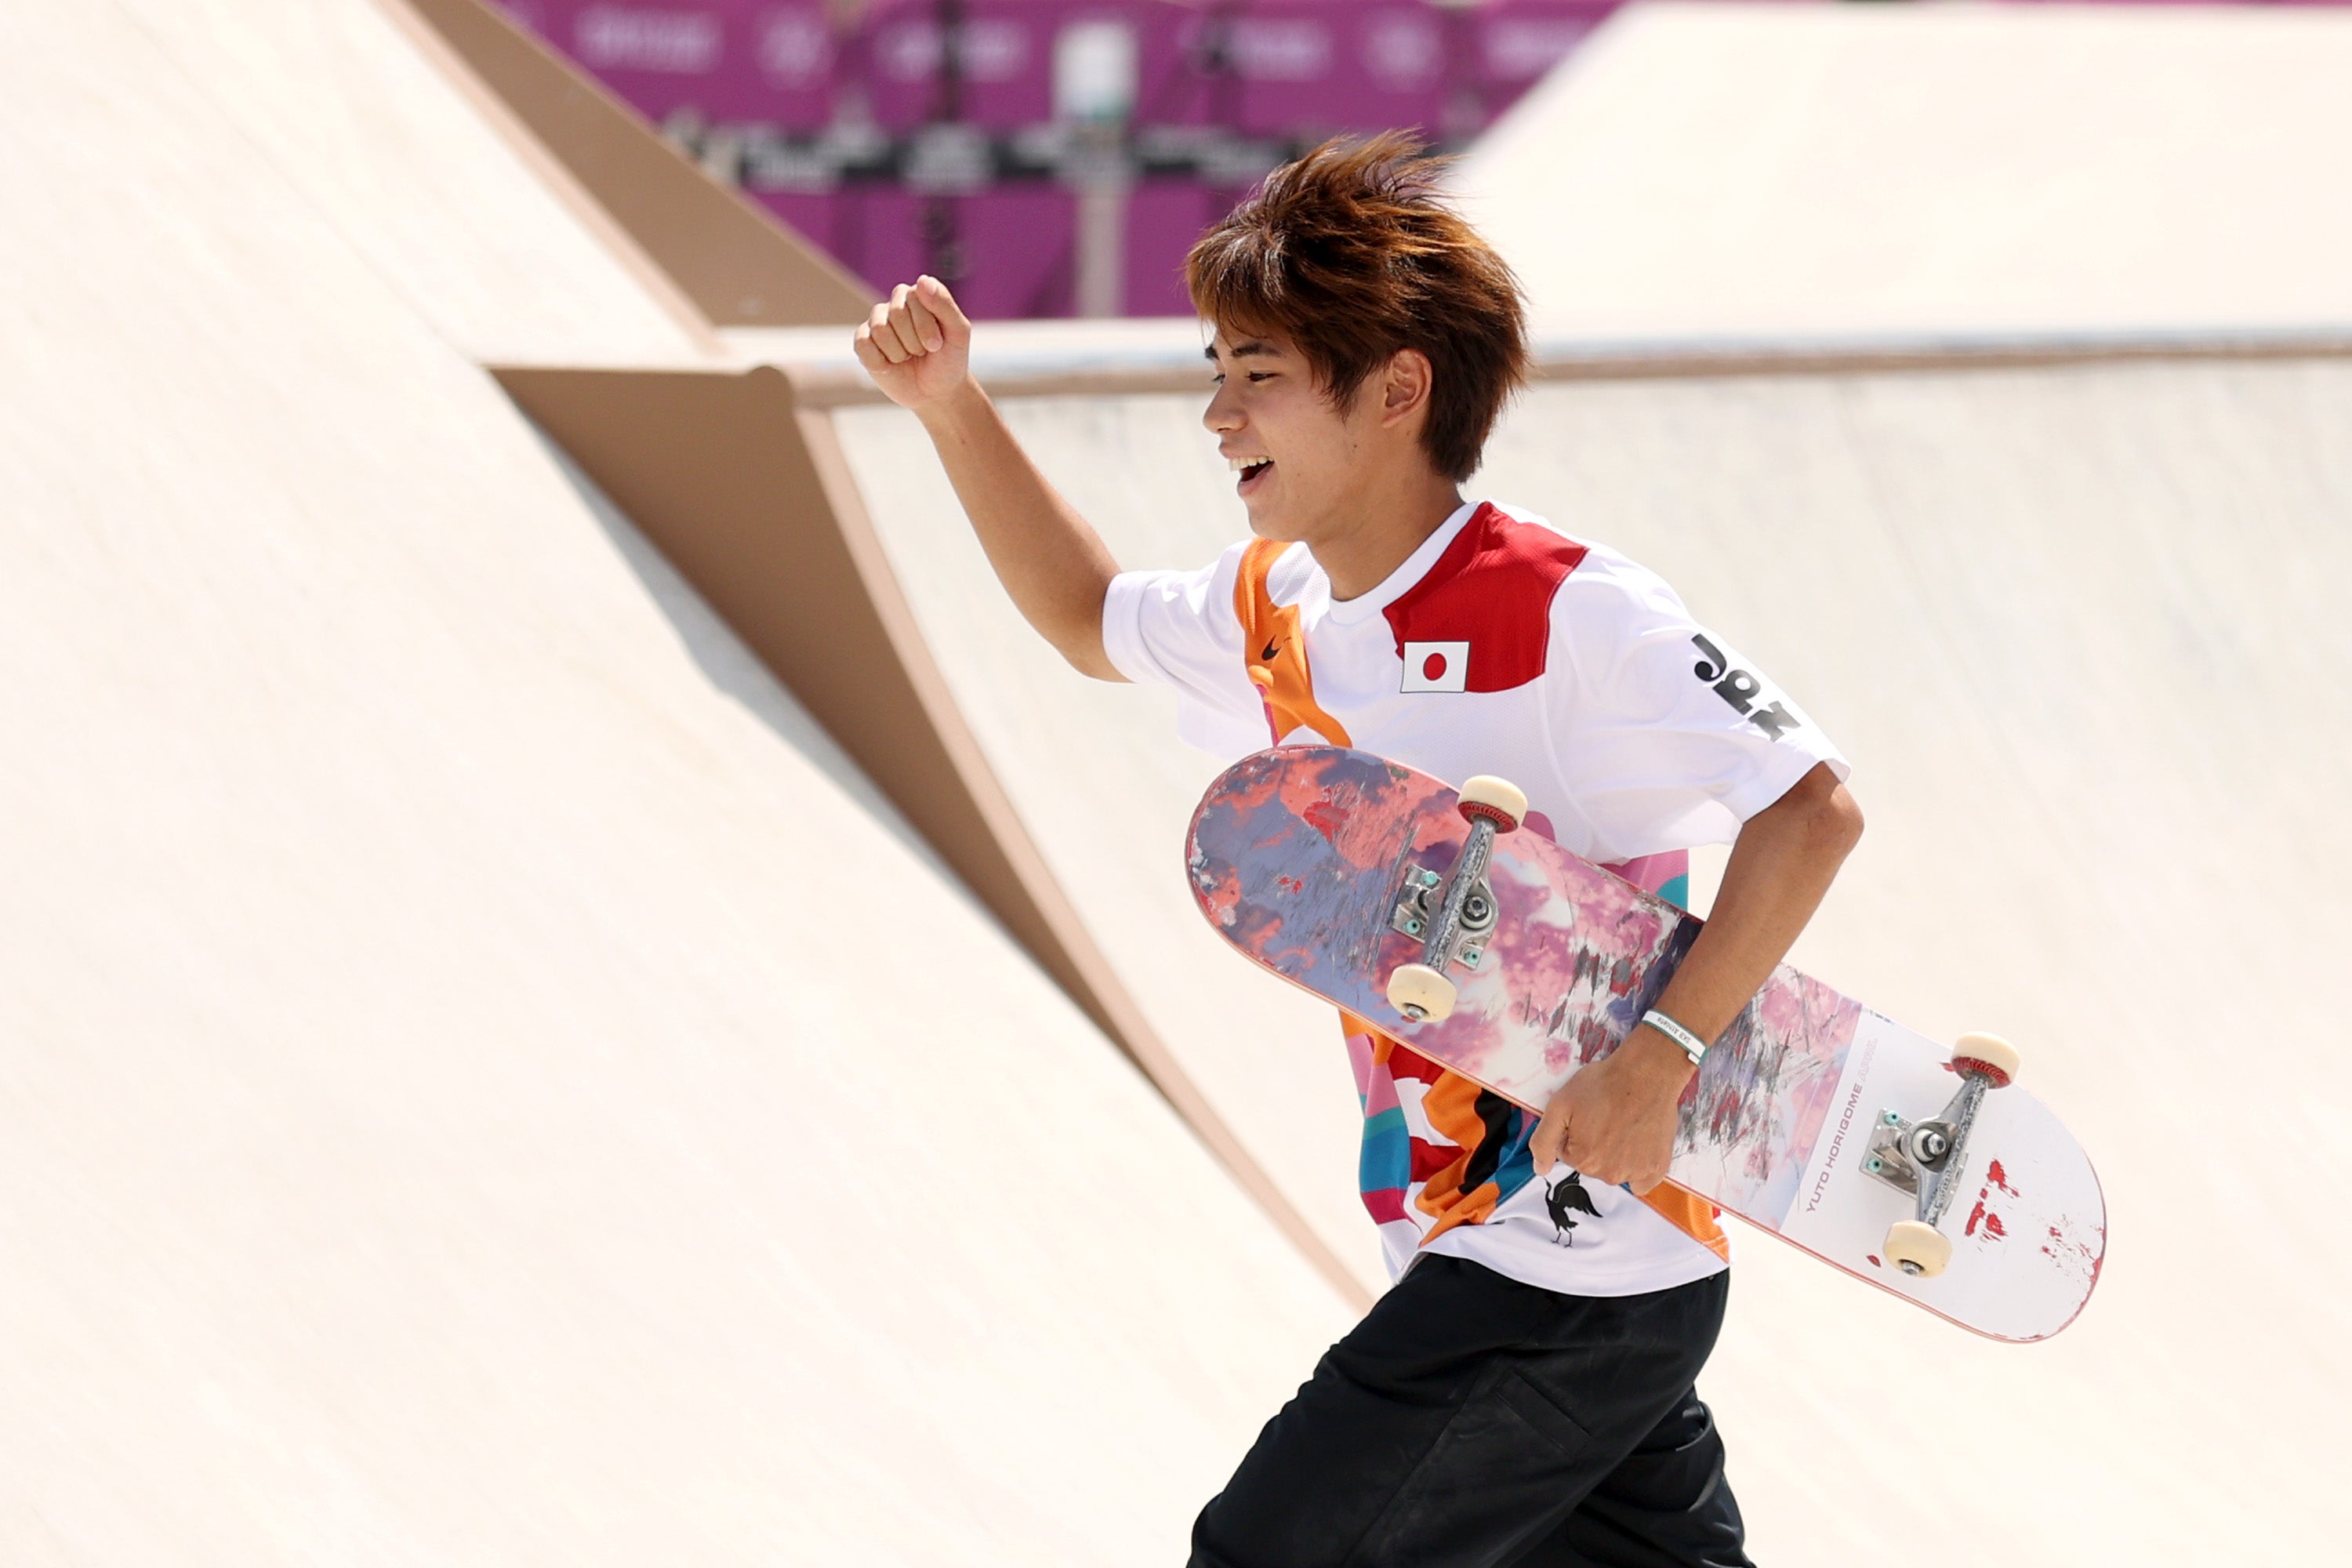 Yuto Horigome of Team Japan celebrates winning the gold medal in the Skateboarding Men's Street Finals on day two of the Tokyo 2020 Olympic Games at Ariake Urban Sports Park on 25 July 2021 in Tokyo, Japan.